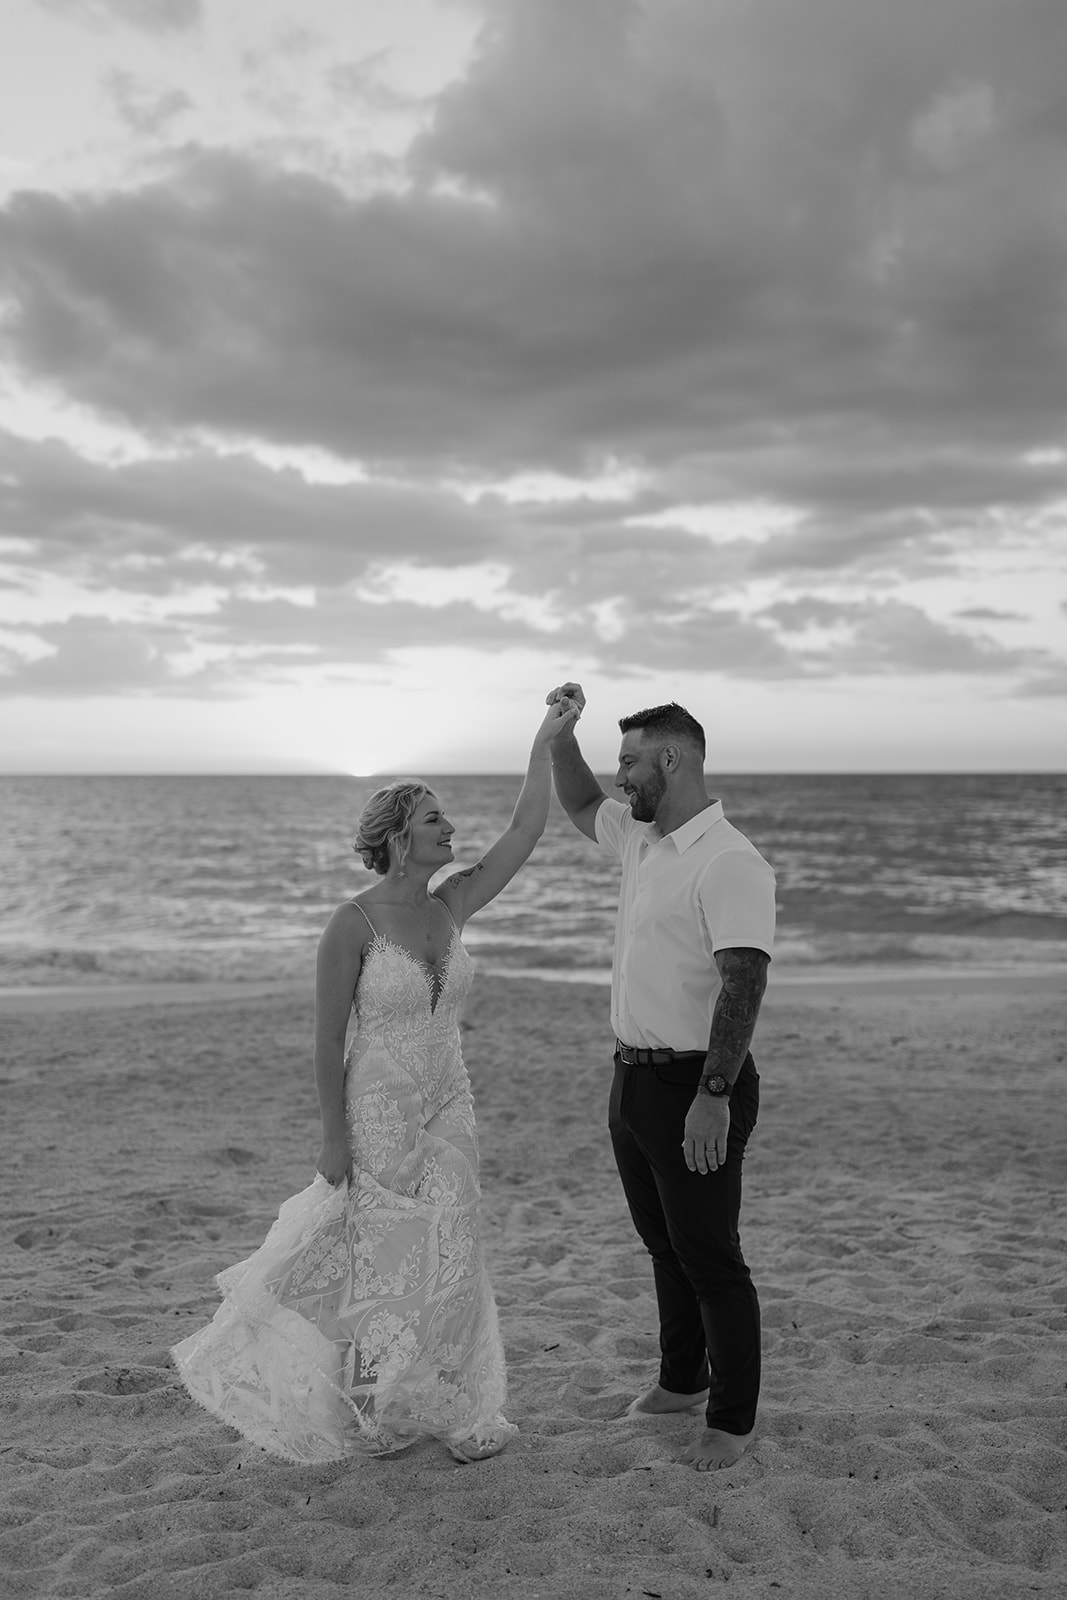 Bride and groom hold hands while walking on the beach in front of the sunset